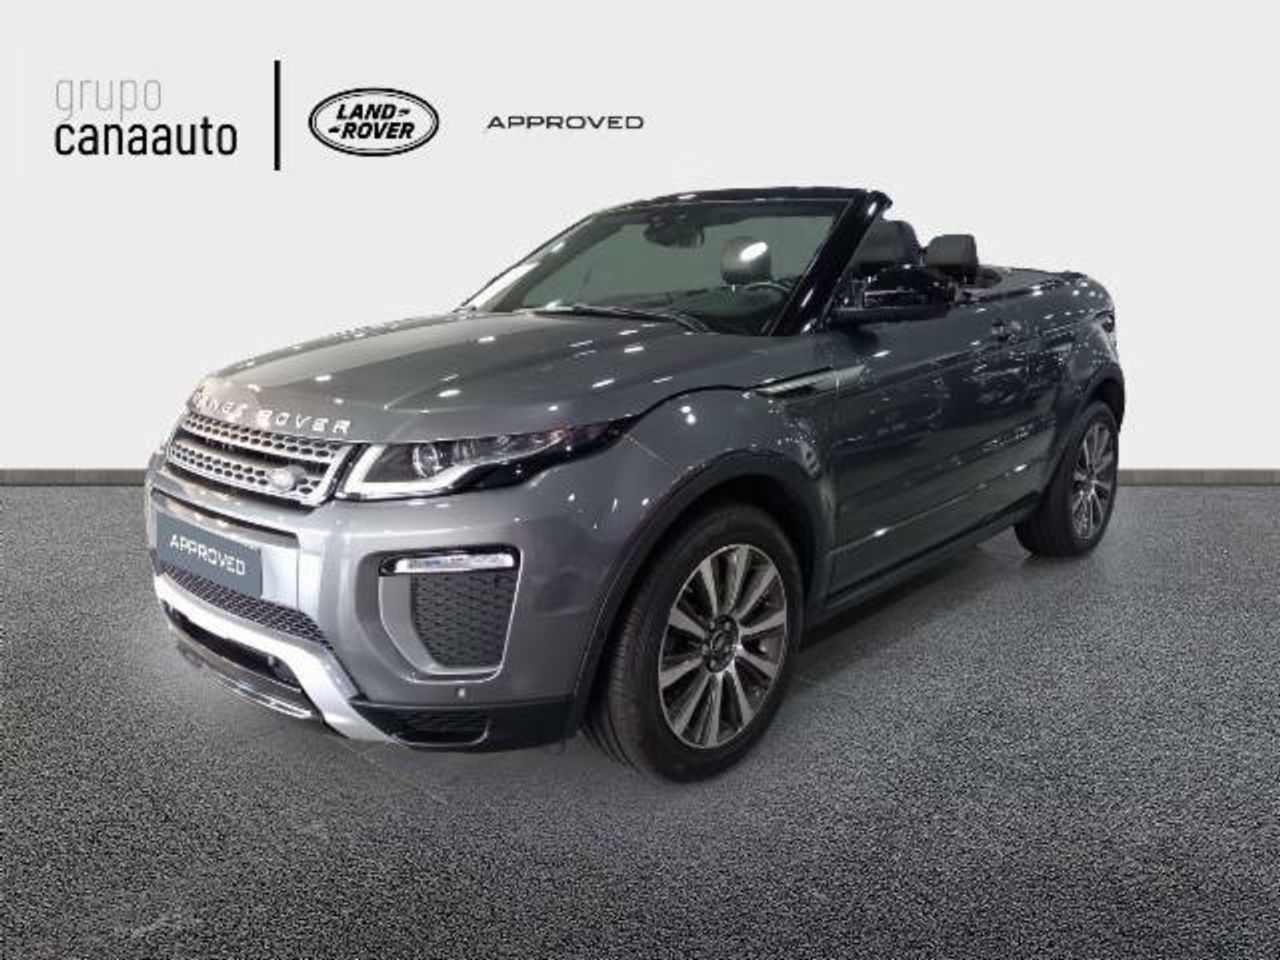 Land-Rover Range Rover Evoque 2.0 TD4 150BHP SE DYN 4WD AT CONVERTIBLE 150 2P  - Foto 1